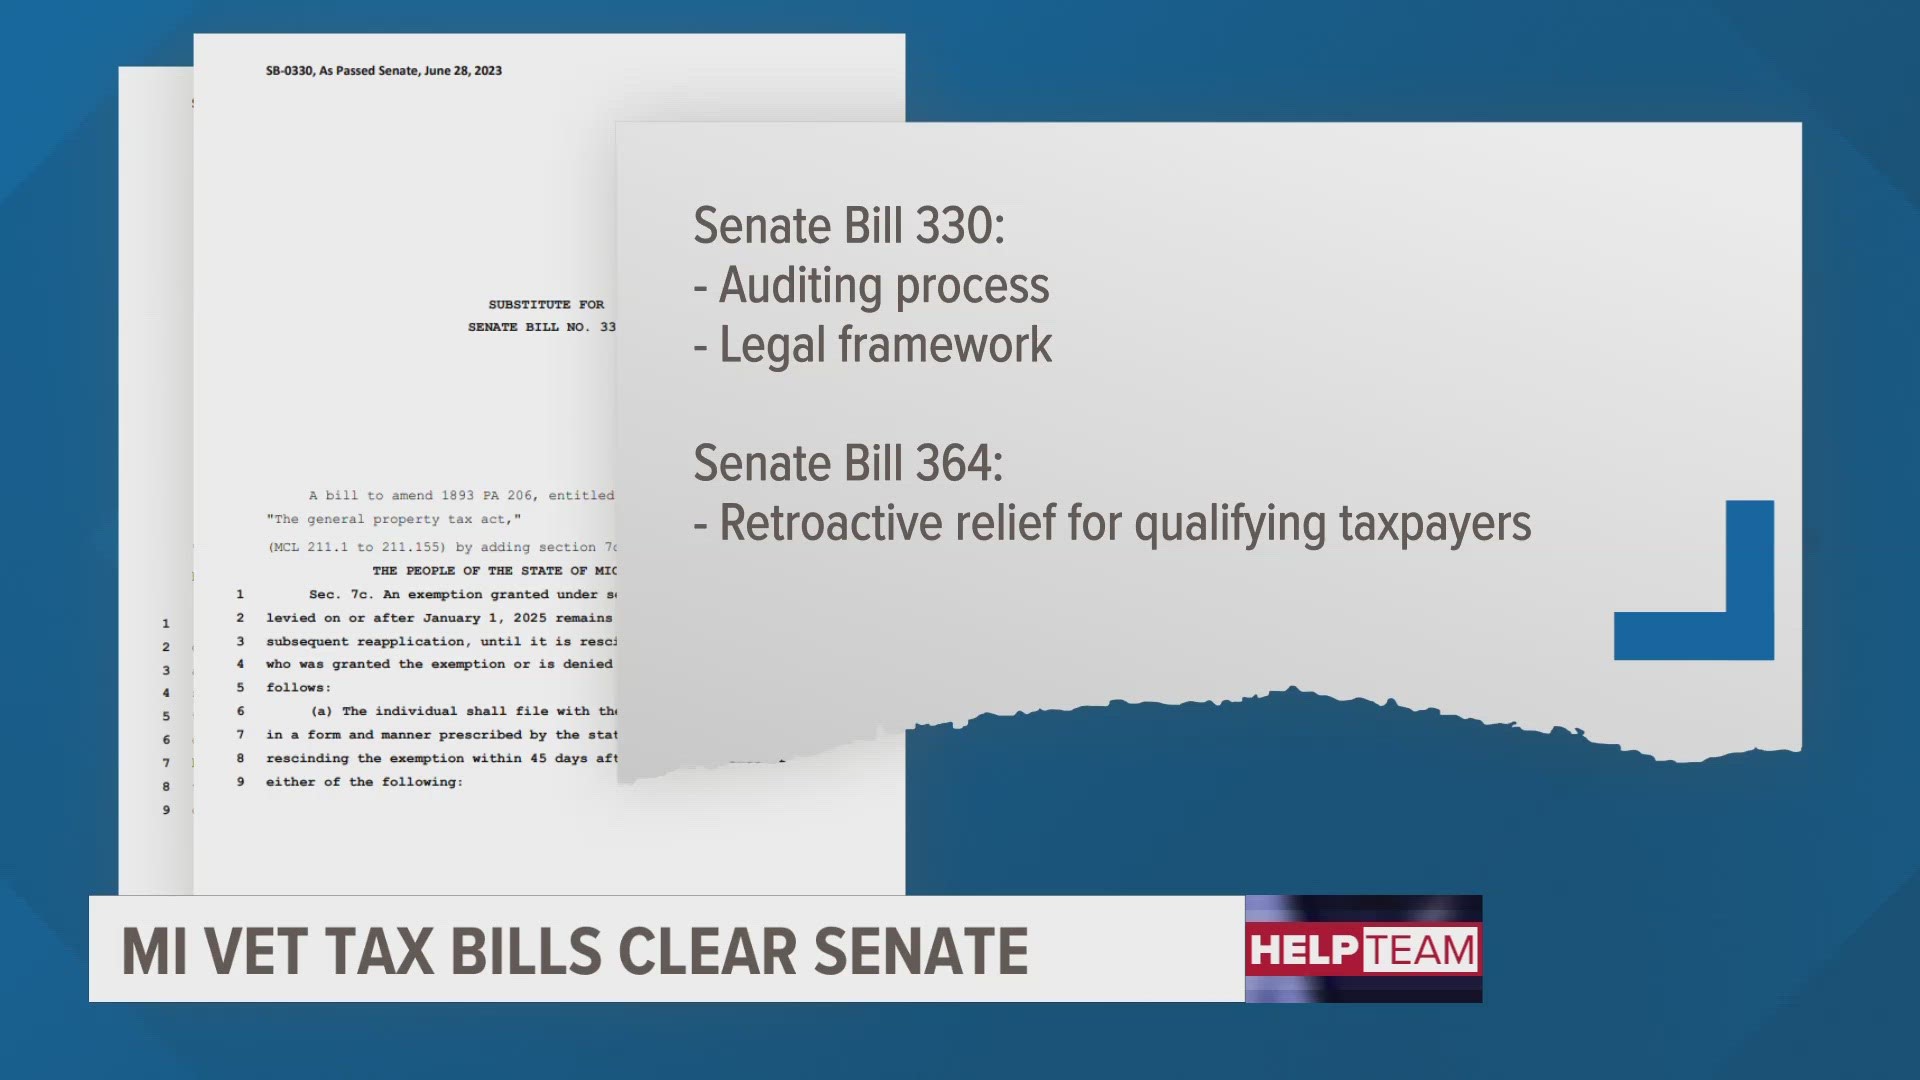 The State Senate, passing a series of bills geared to restore a tax benefit for disabled vets and their families.